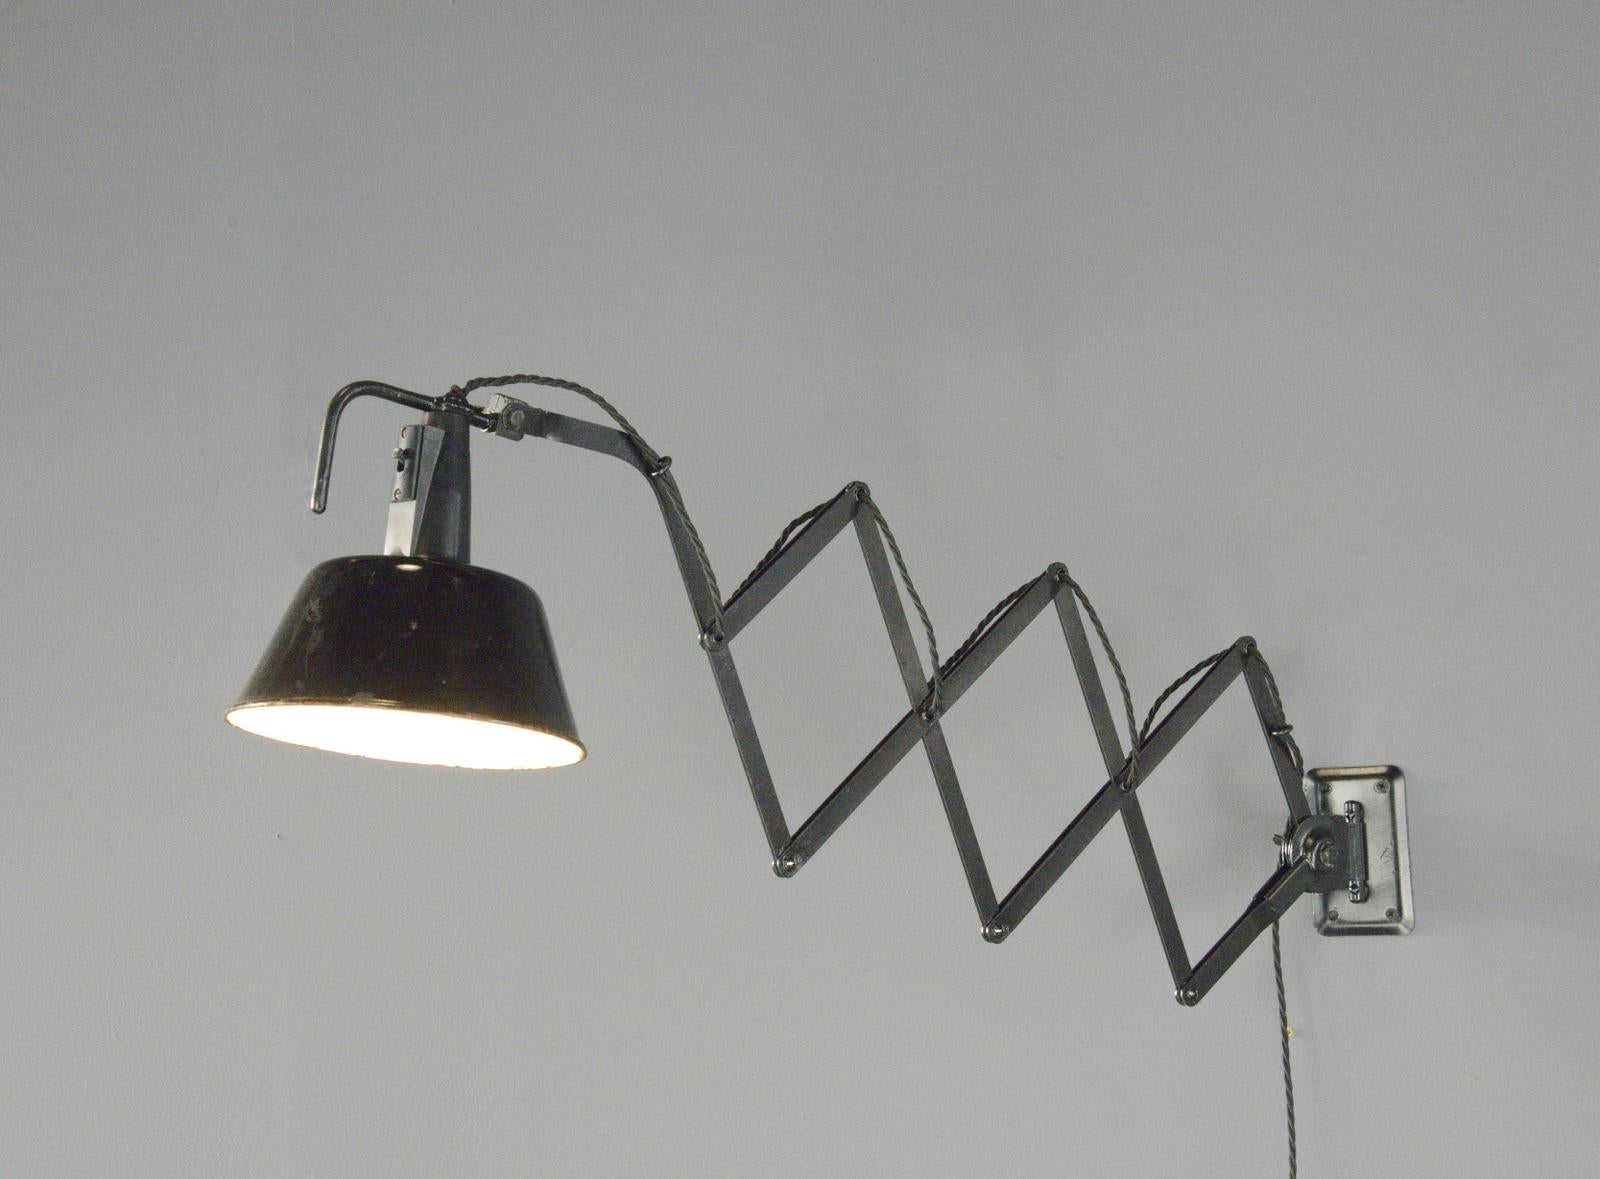 Modernist Scissor Lamp By Wilhelm Bader Circa 1930s

- Large extendable scissor mechanism 
- Original On/Off switch
- Takes E27 fitting bulbs
- German ~ 1930s
- Extends up to 115cm from the wall
- 18cm wide x 25cm tall

Condition Report

Fully re